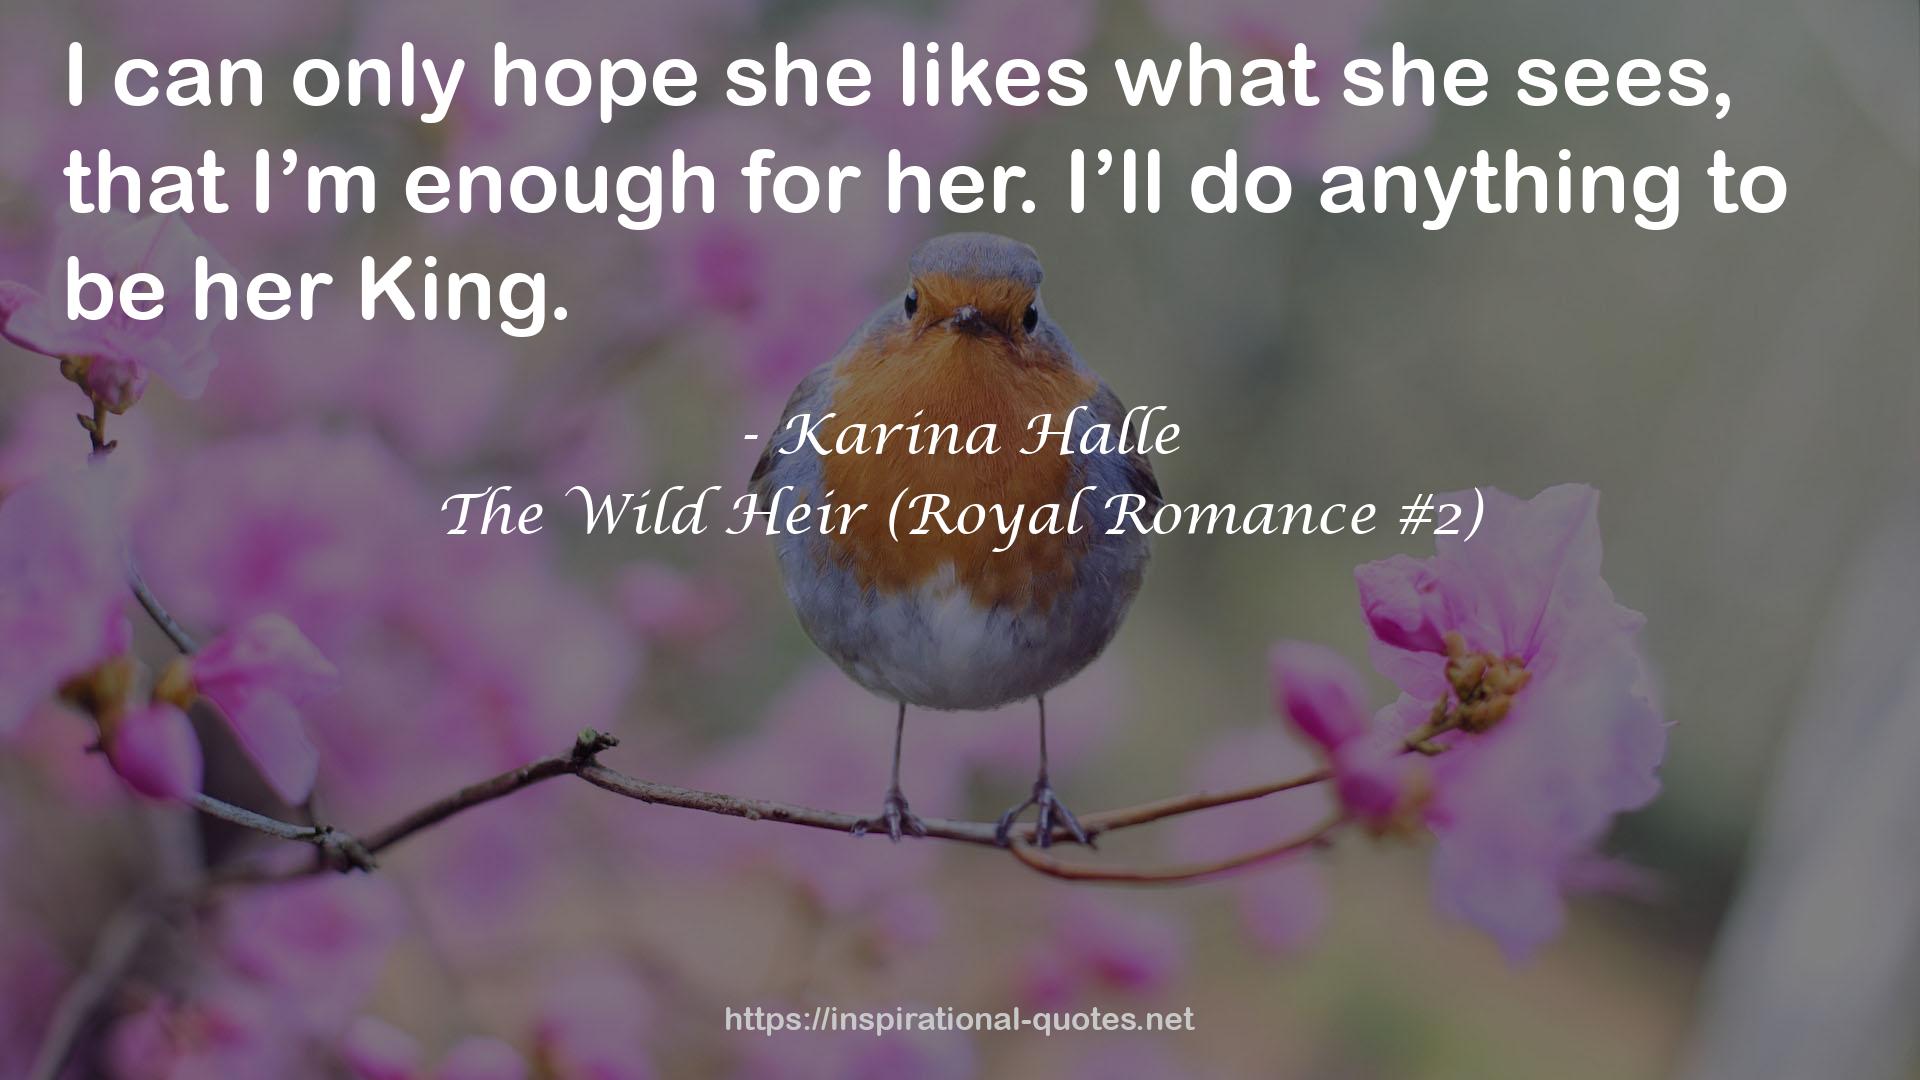 The Wild Heir (Royal Romance #2) QUOTES